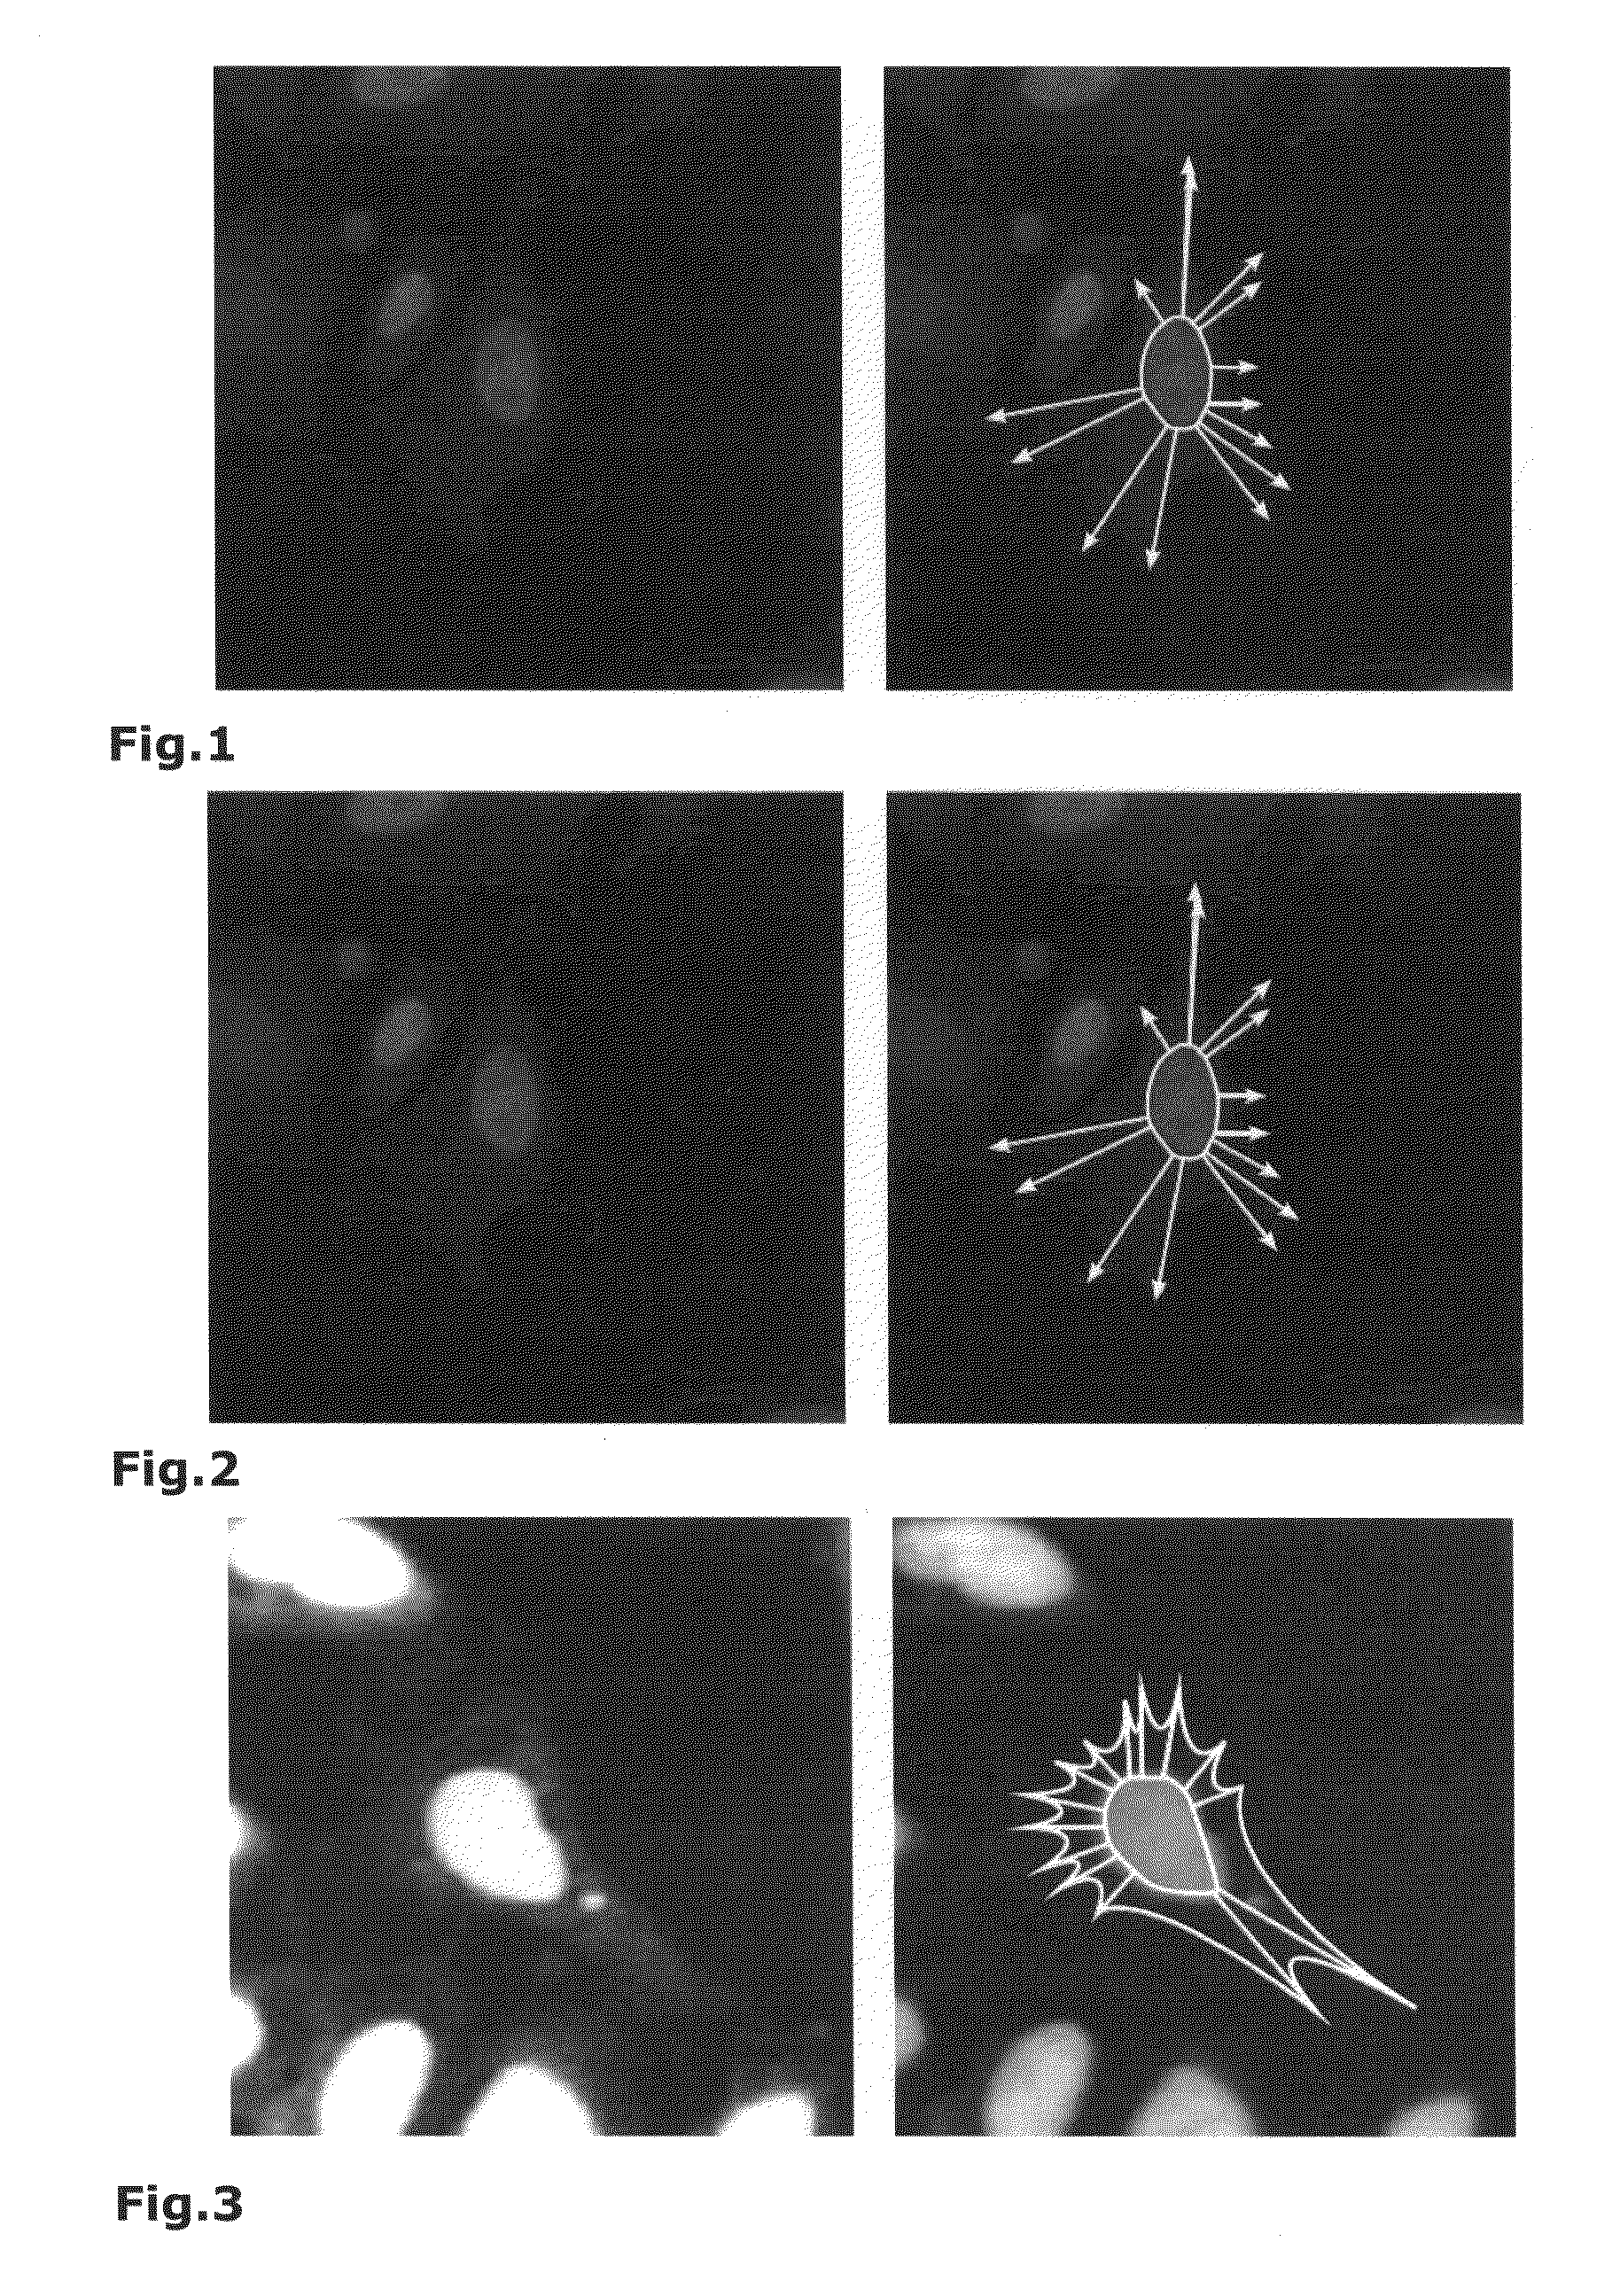 Method for Detecting Contours in Images of Biological Cells